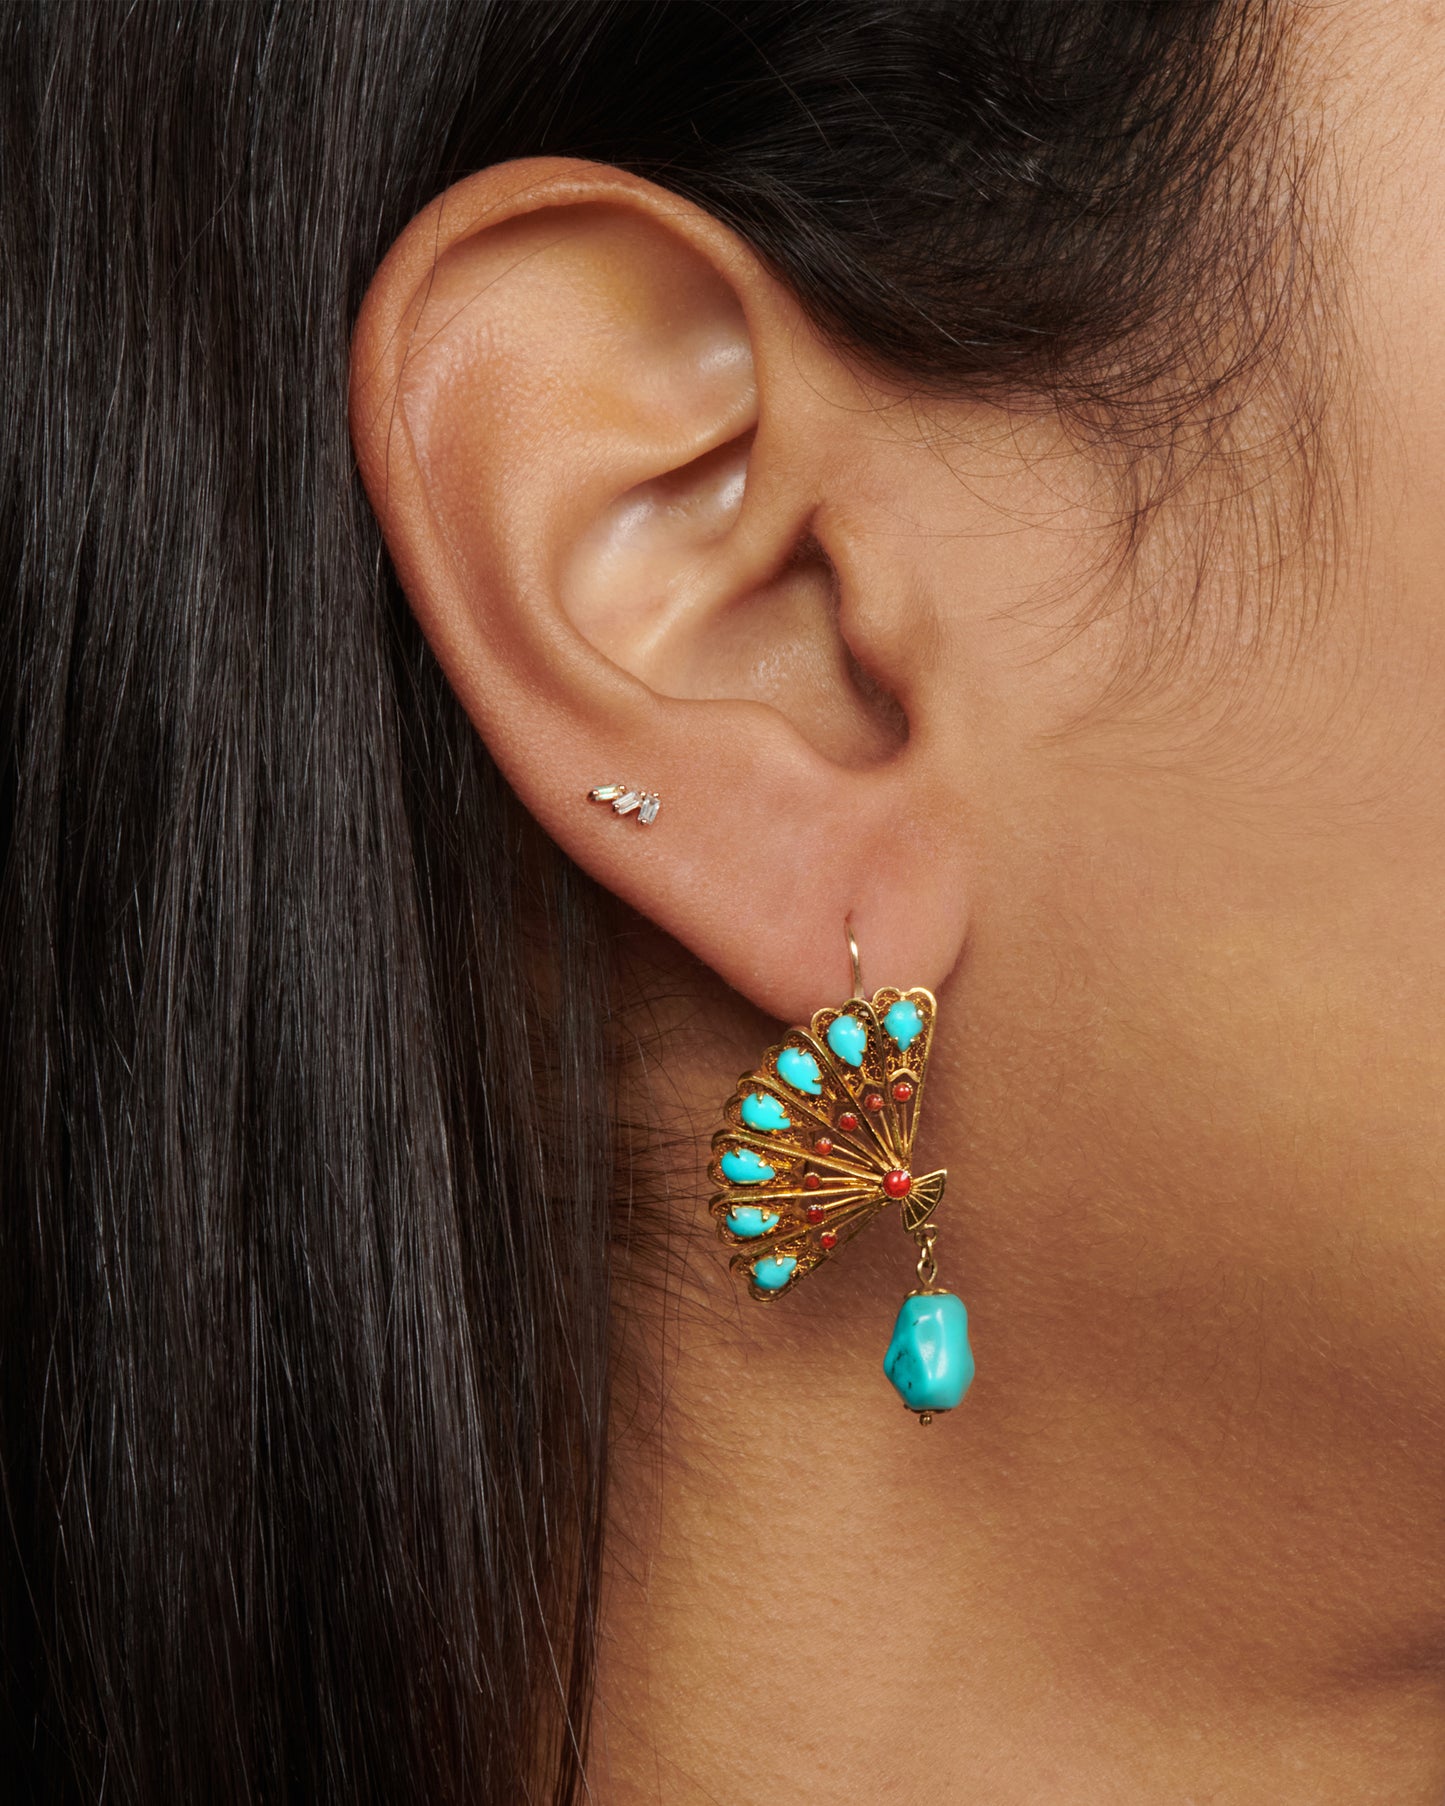 A pair of beautiful gold fan earrings with turquoises and red enamel details. We love these for their vintage vibe, versatile color palette, and sense of balance the hanging stones creates.